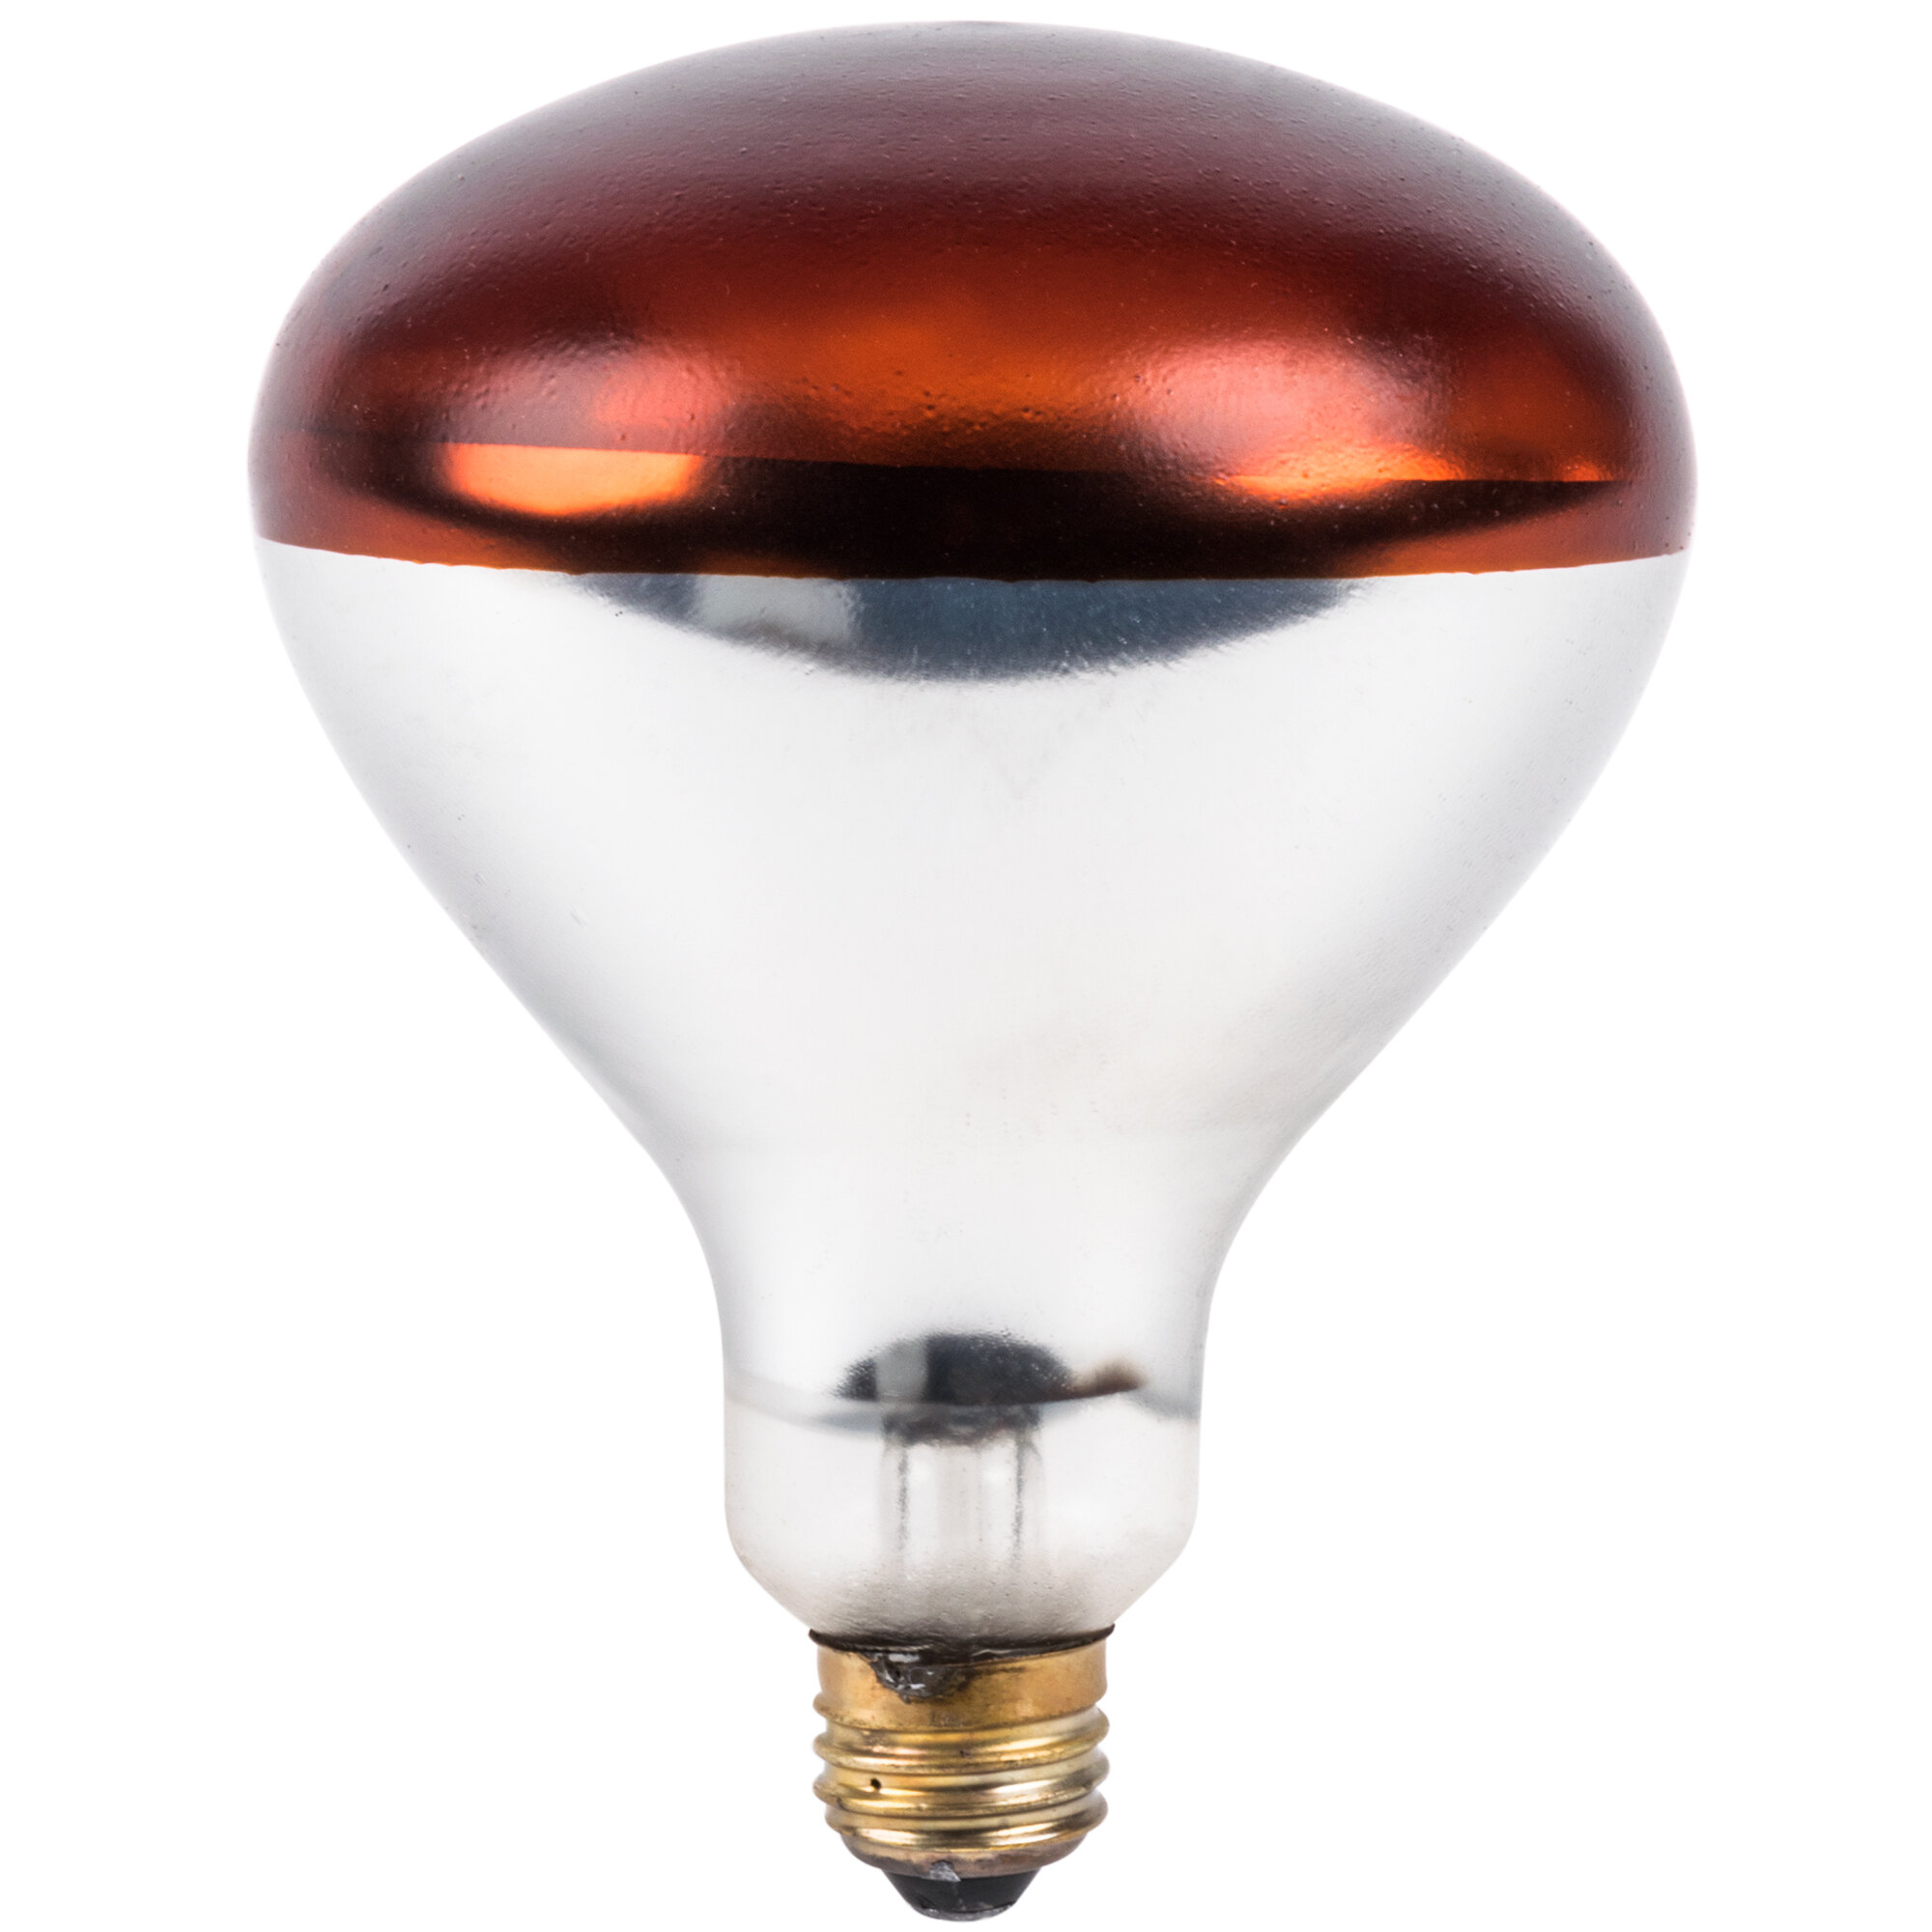 Lavex Janitorial 250 Watt Red Coated Infrared Heat Lamp Light Bulb